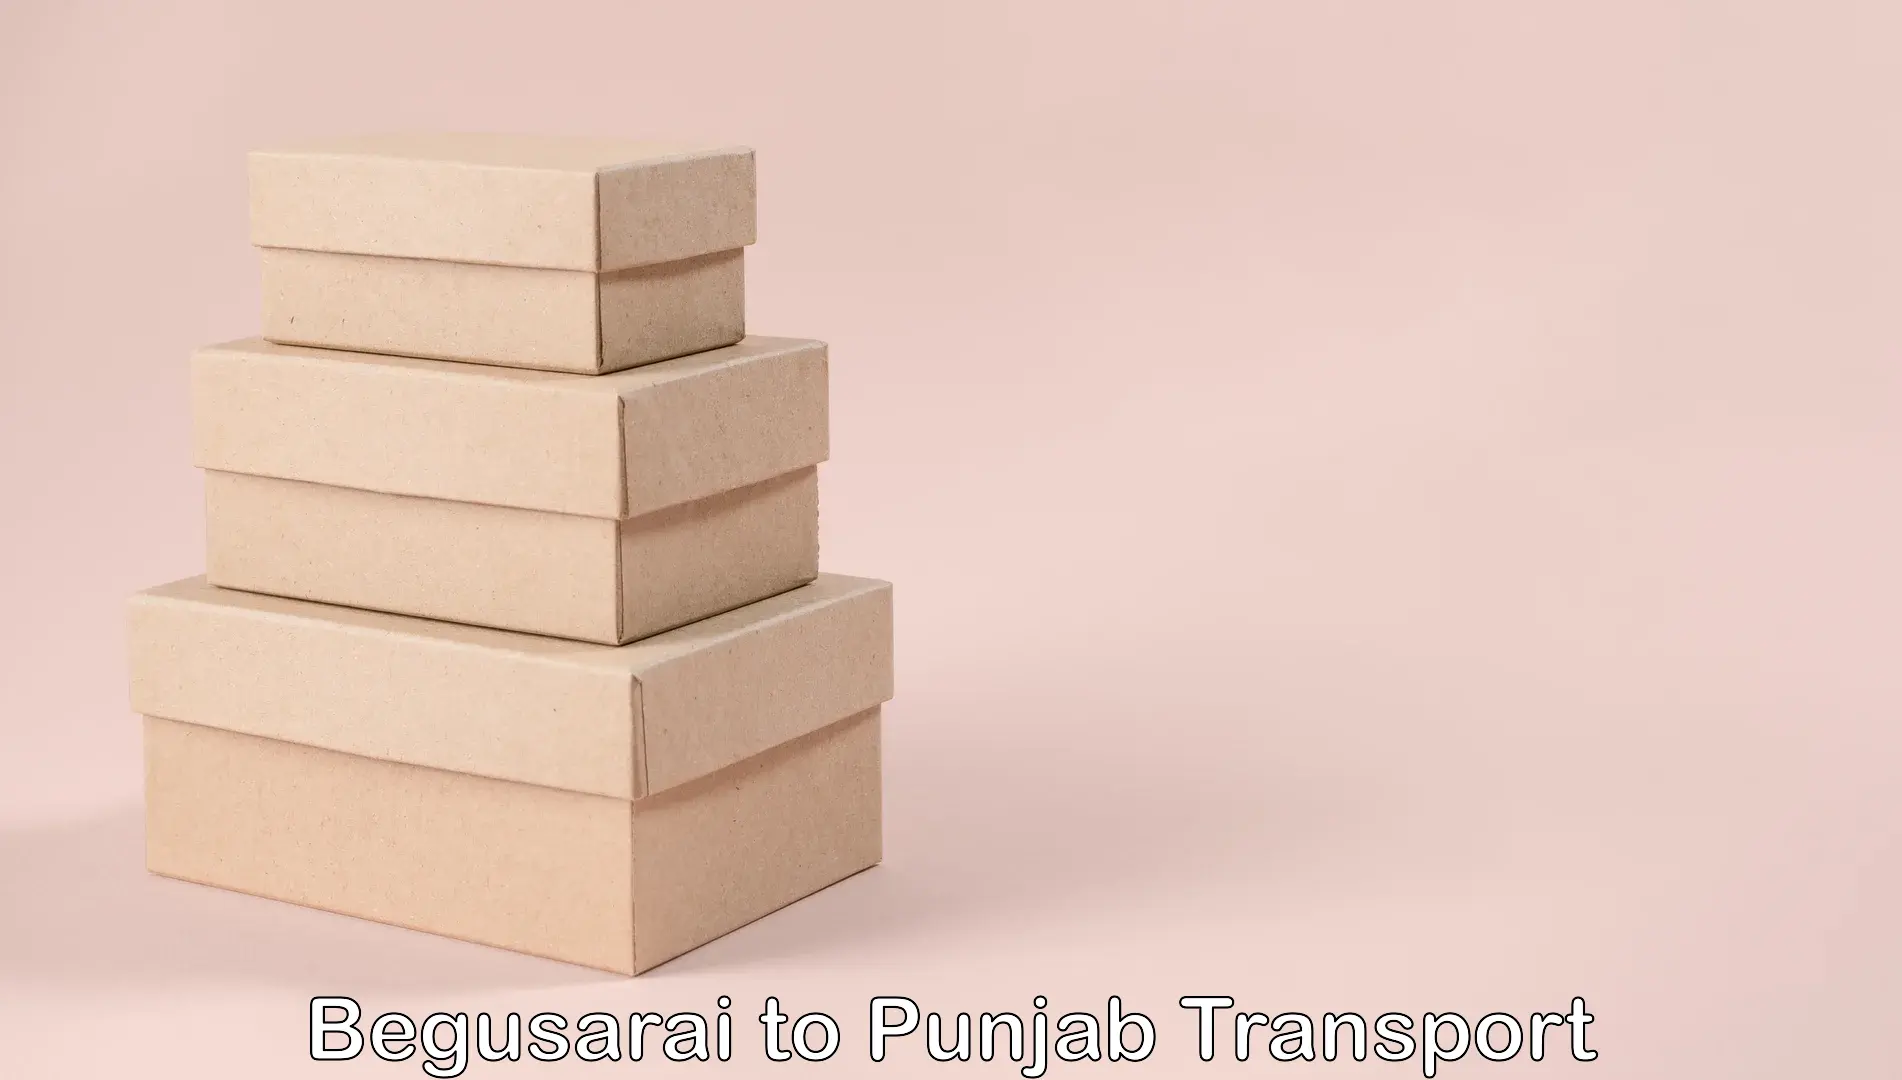 Daily parcel service transport Begusarai to Mohali